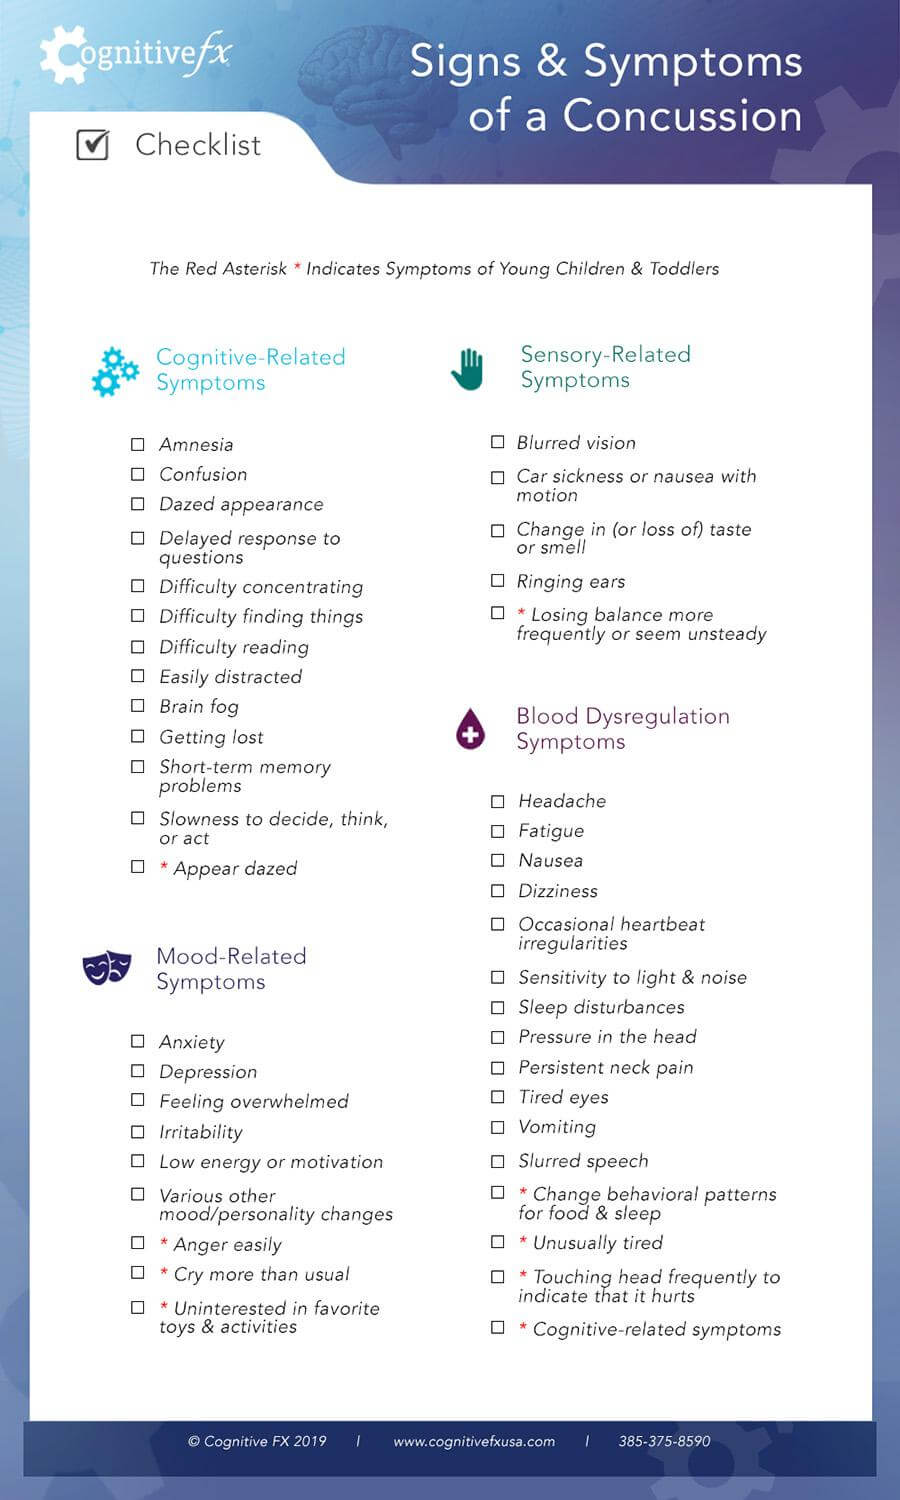 Signs and symptoms of a concussion checklist